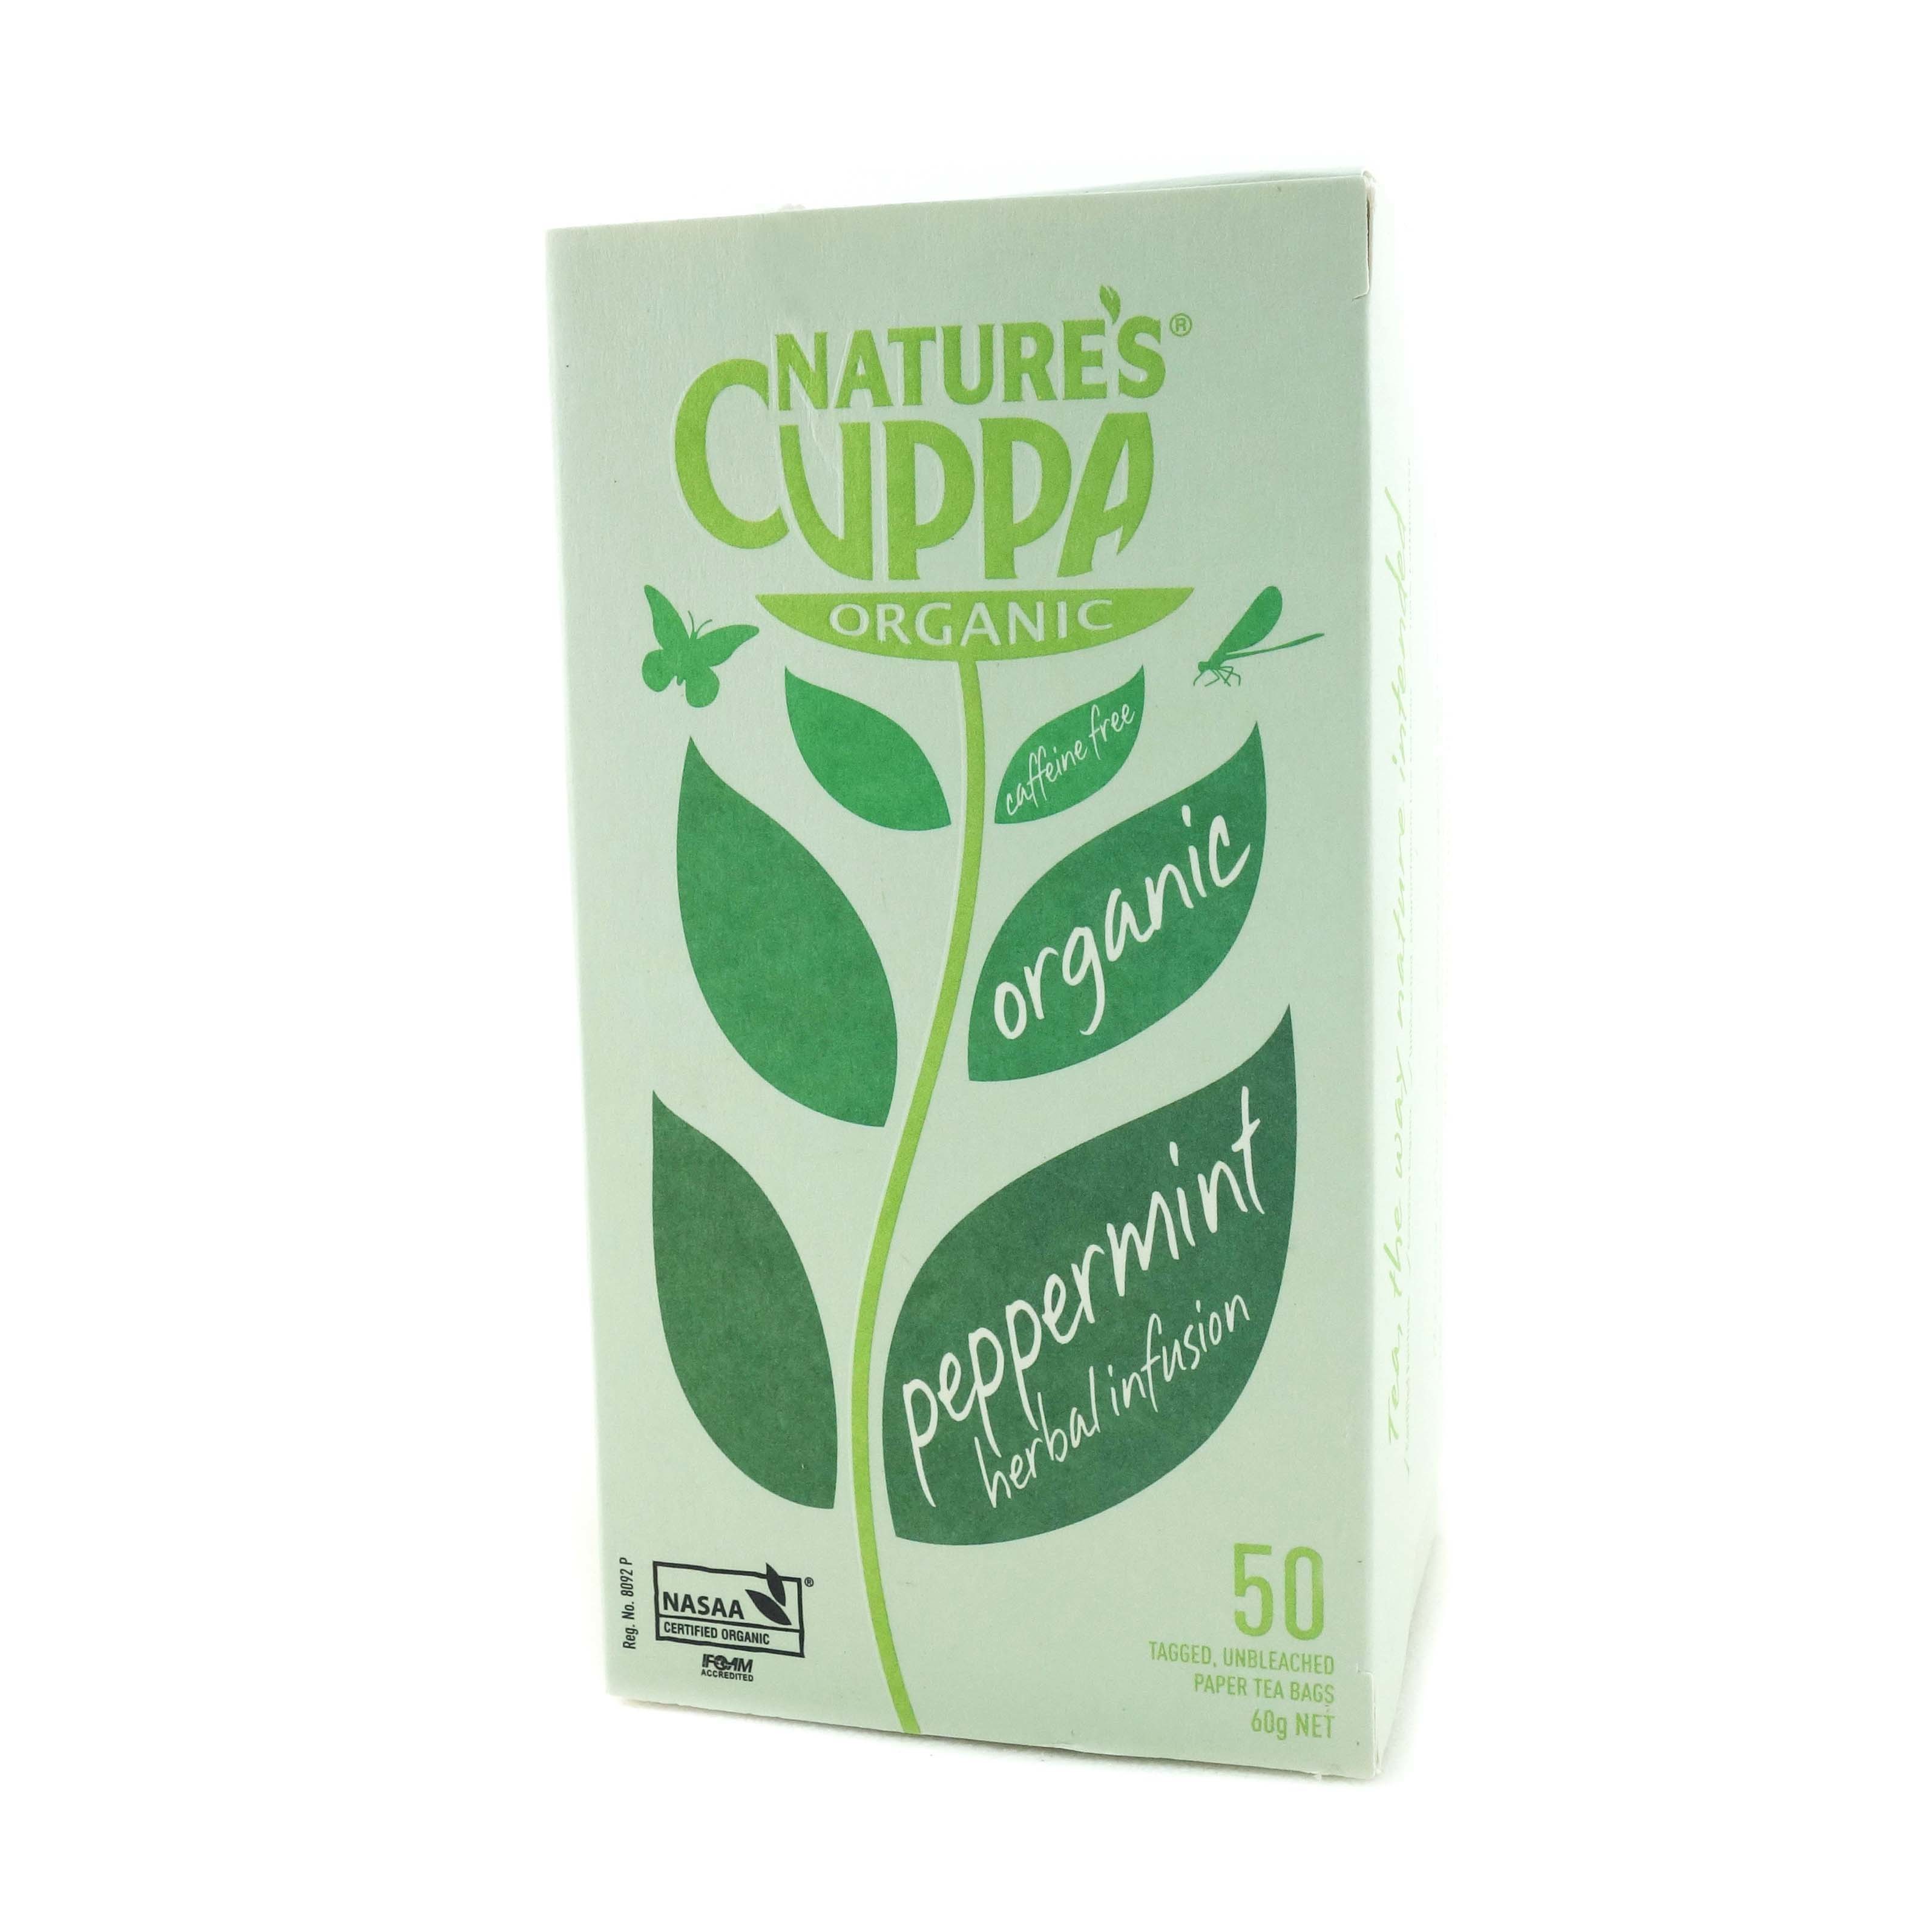 Natures Cuppa Organic Peppermint Tea 50's 60g*